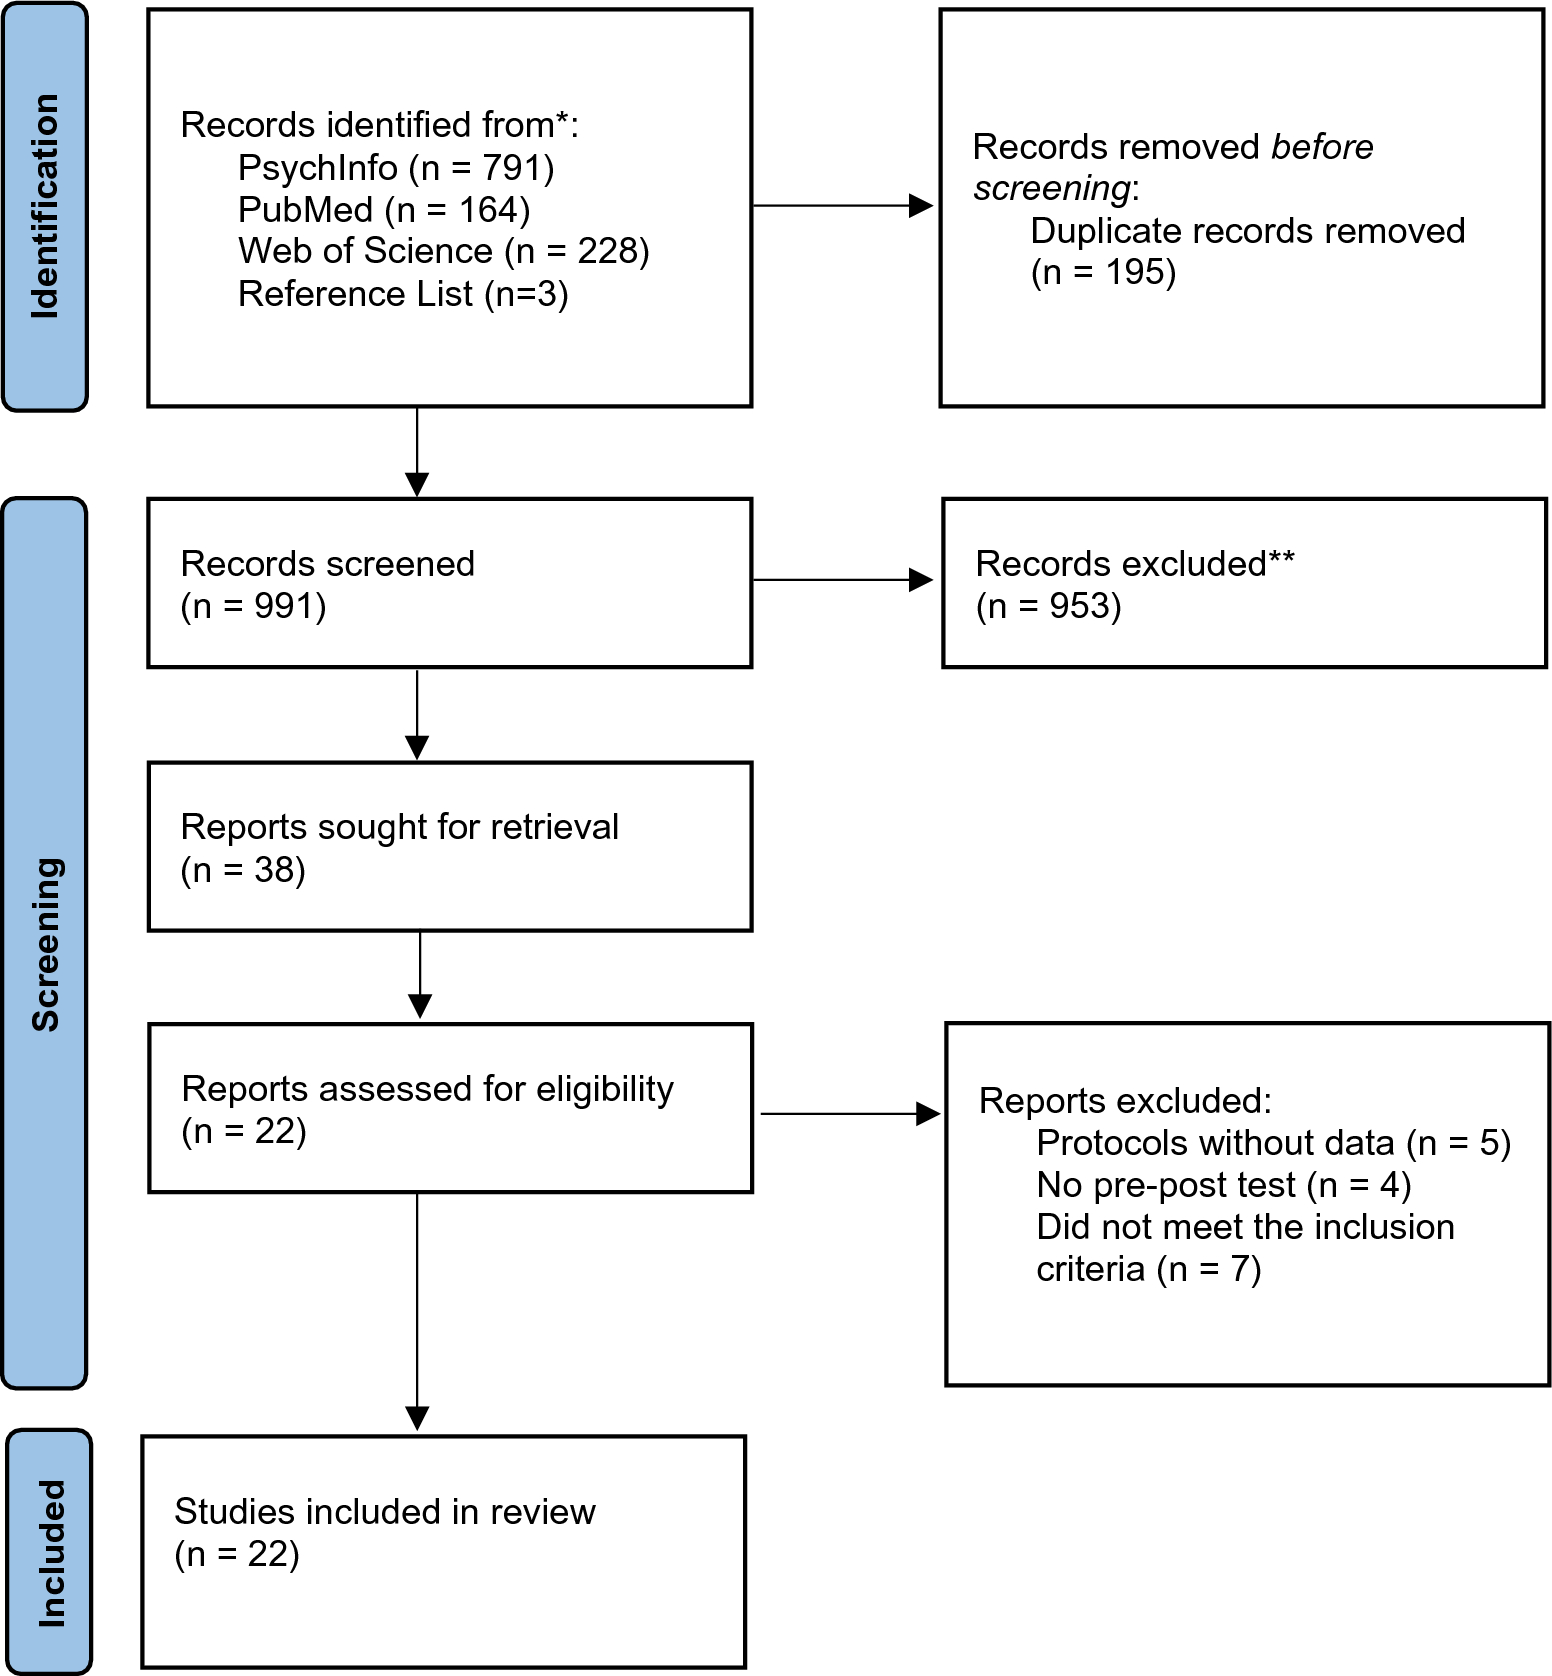 Universal, school-based transdiagnostic interventions to promote mental health and emotional wellbeing: a systematic review